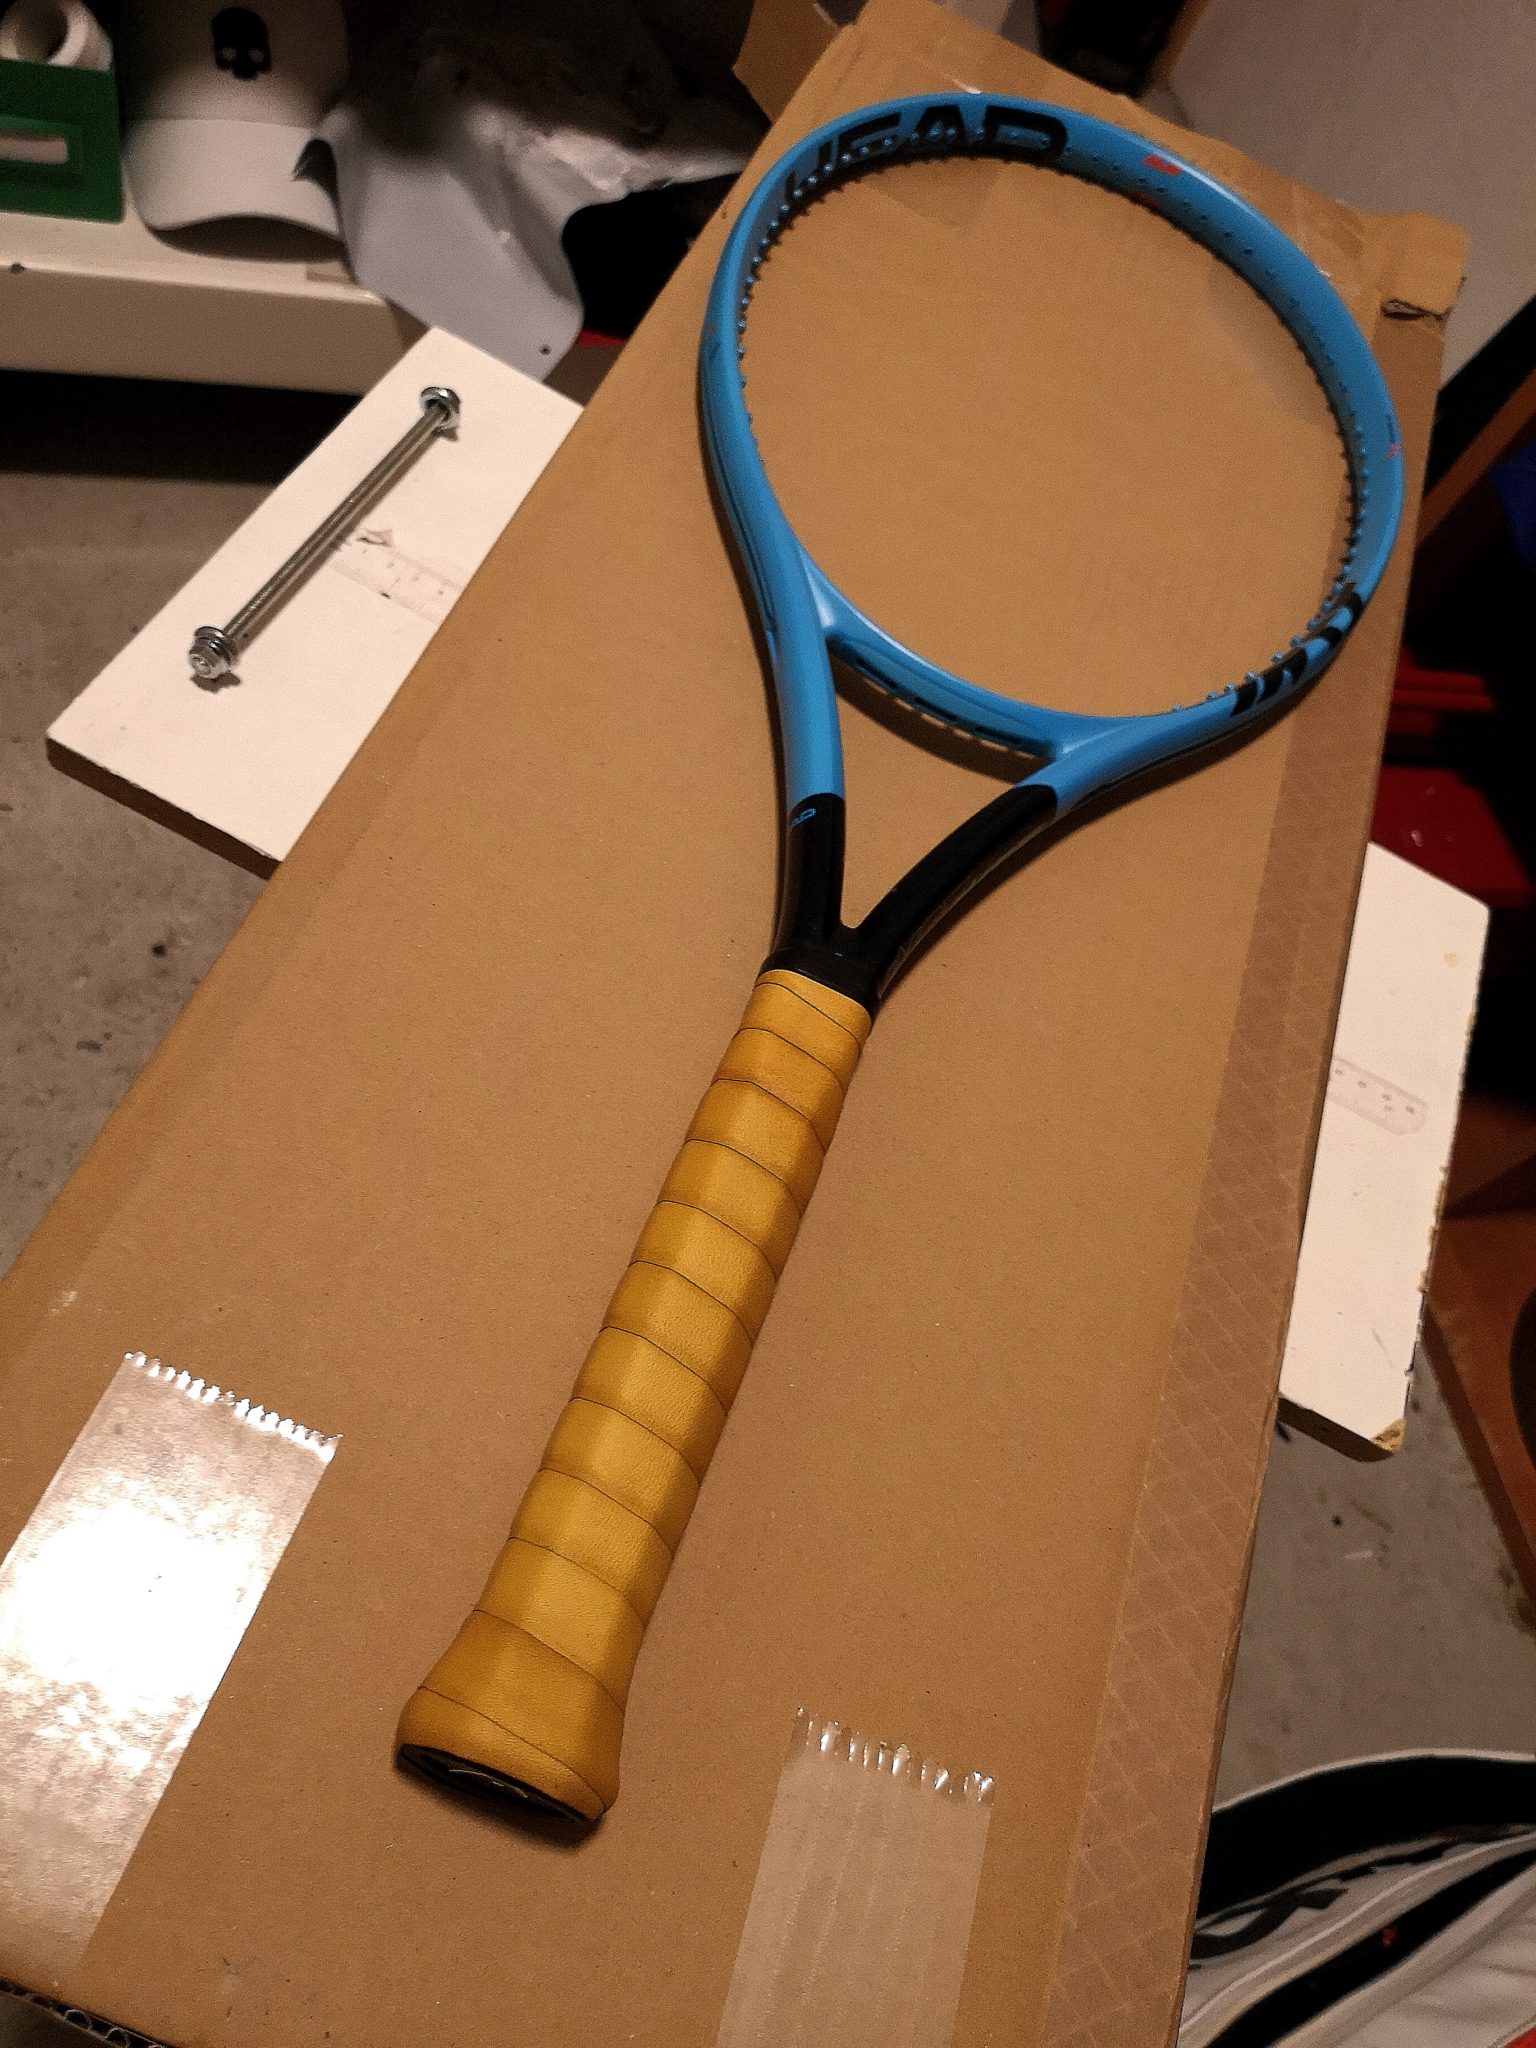 Details about   Head Ti 1000 Tennis Racquet Full Size cushion grip stringing 16/19 280 gms std 